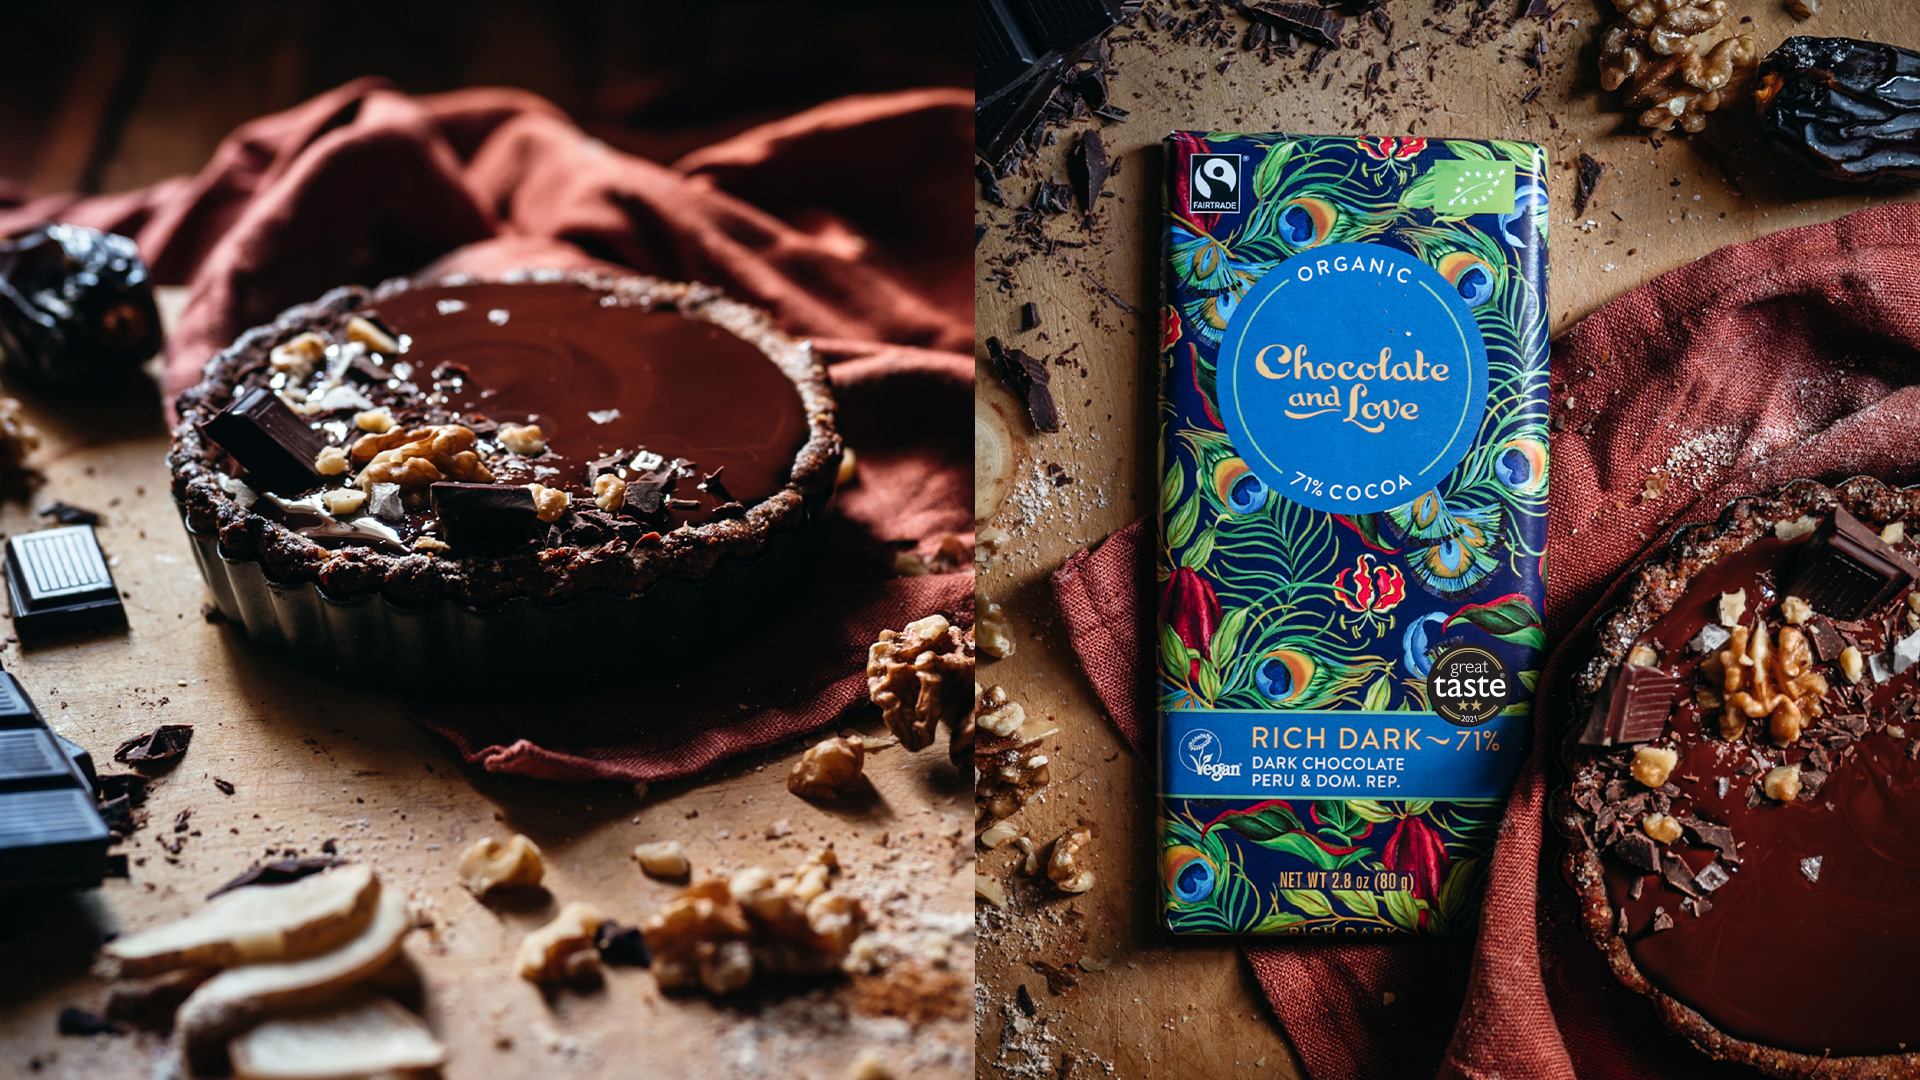 You are currently viewing Chocolate and Love’s Rich Dark Chocolate Mini Tart